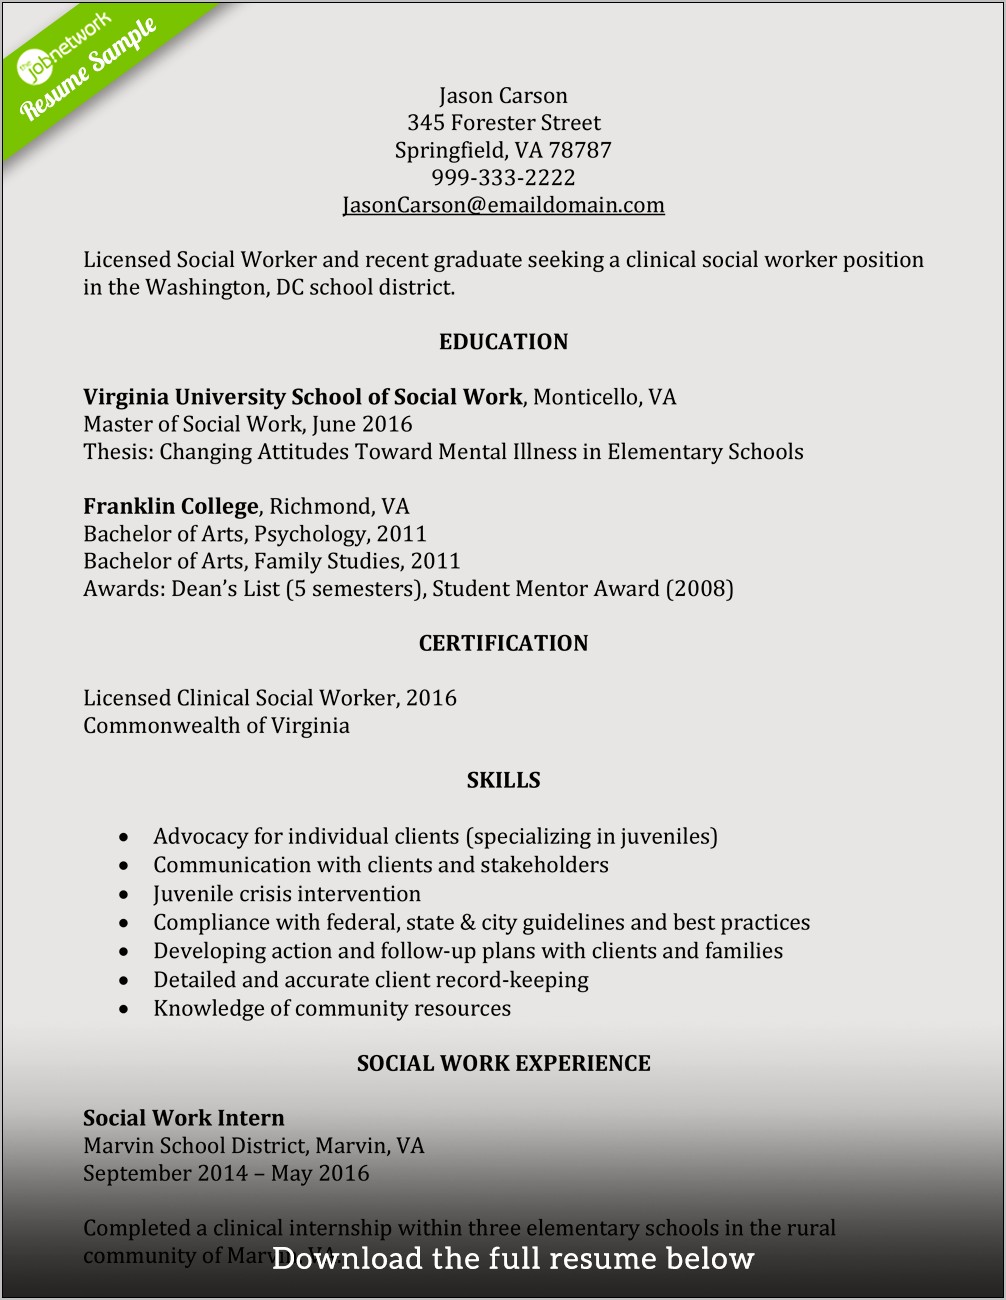 Resume To Work In A School